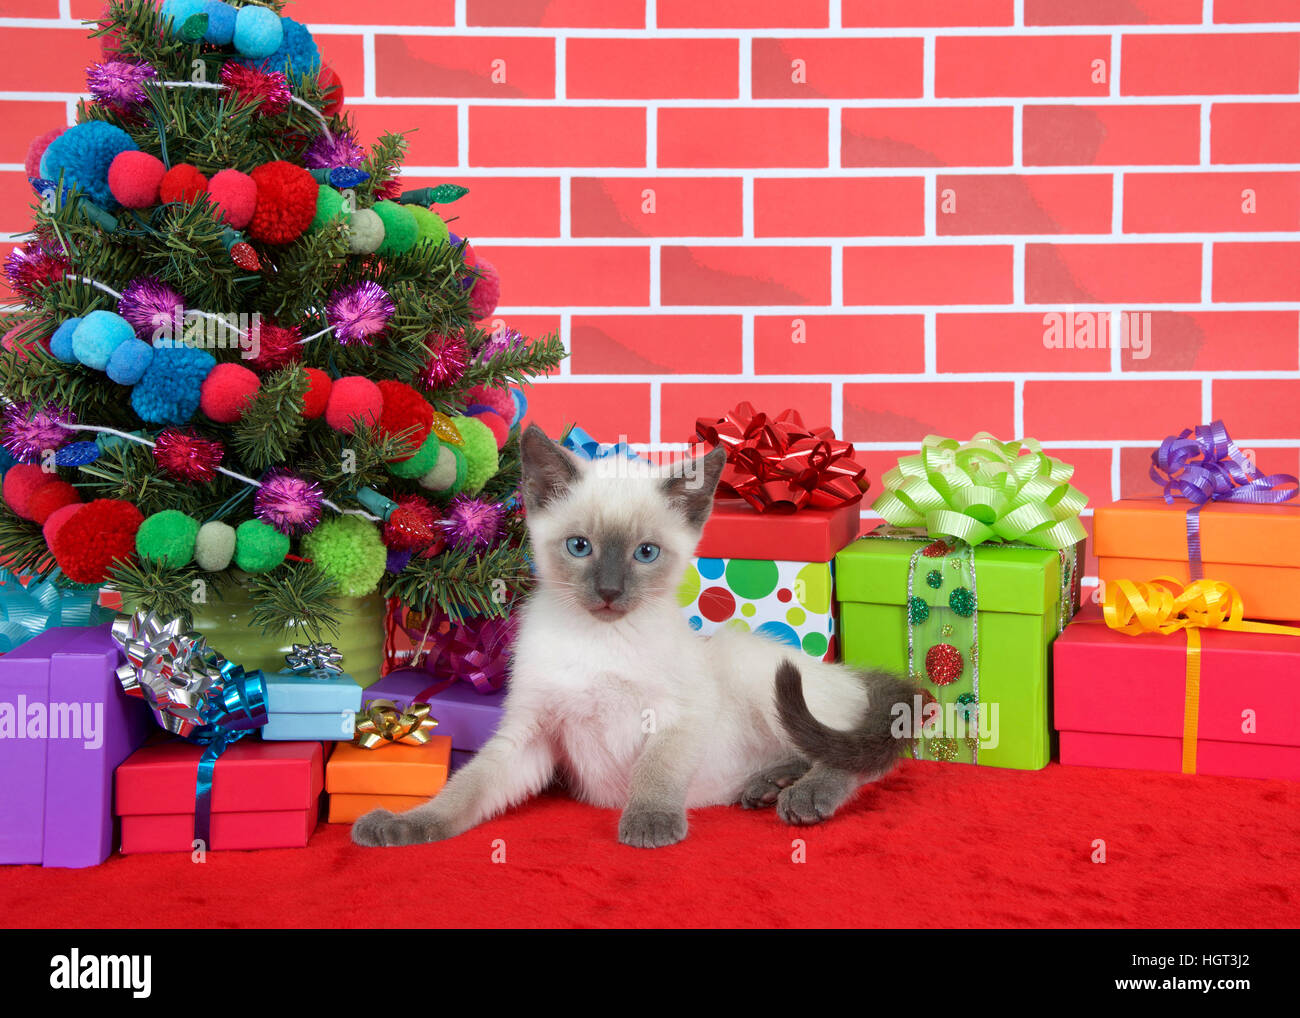 Siamese kitten looking at viewer, laying on red fur carpet by christmas tree, decorated with yarn balls lights, colorful prents Stock Photo